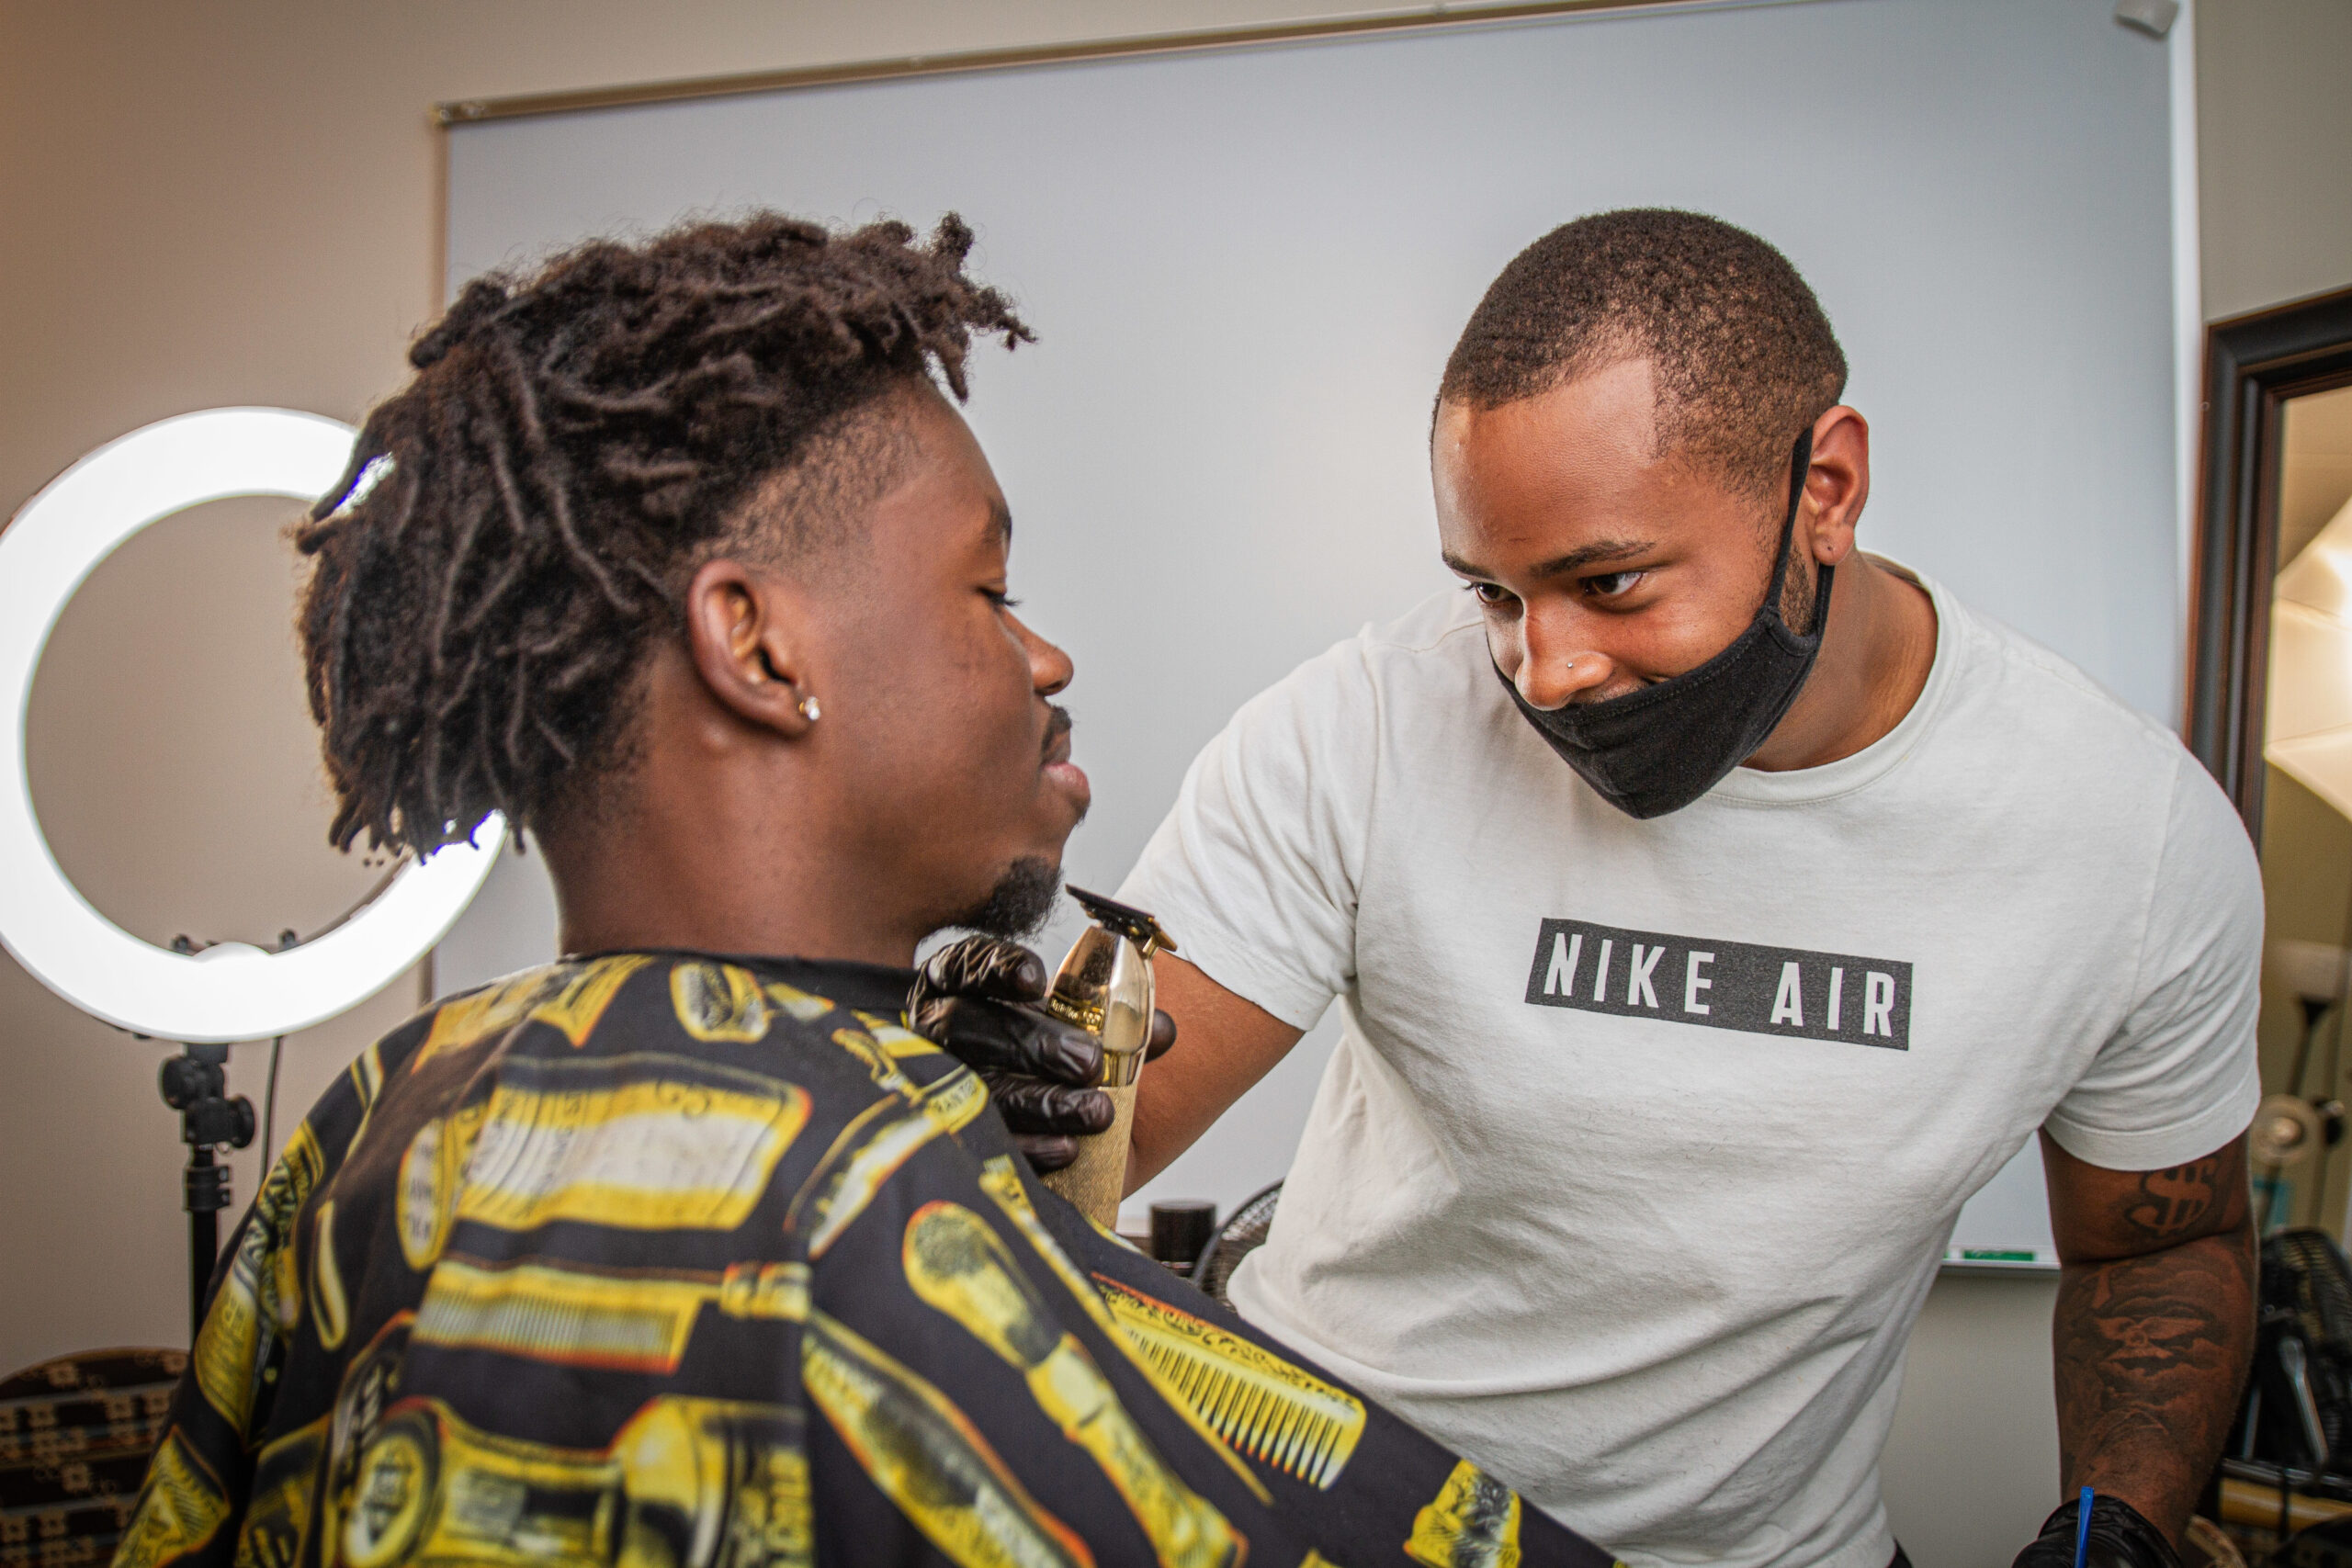 A man trims facial hair of a St. Norbert College student at a local barber shop